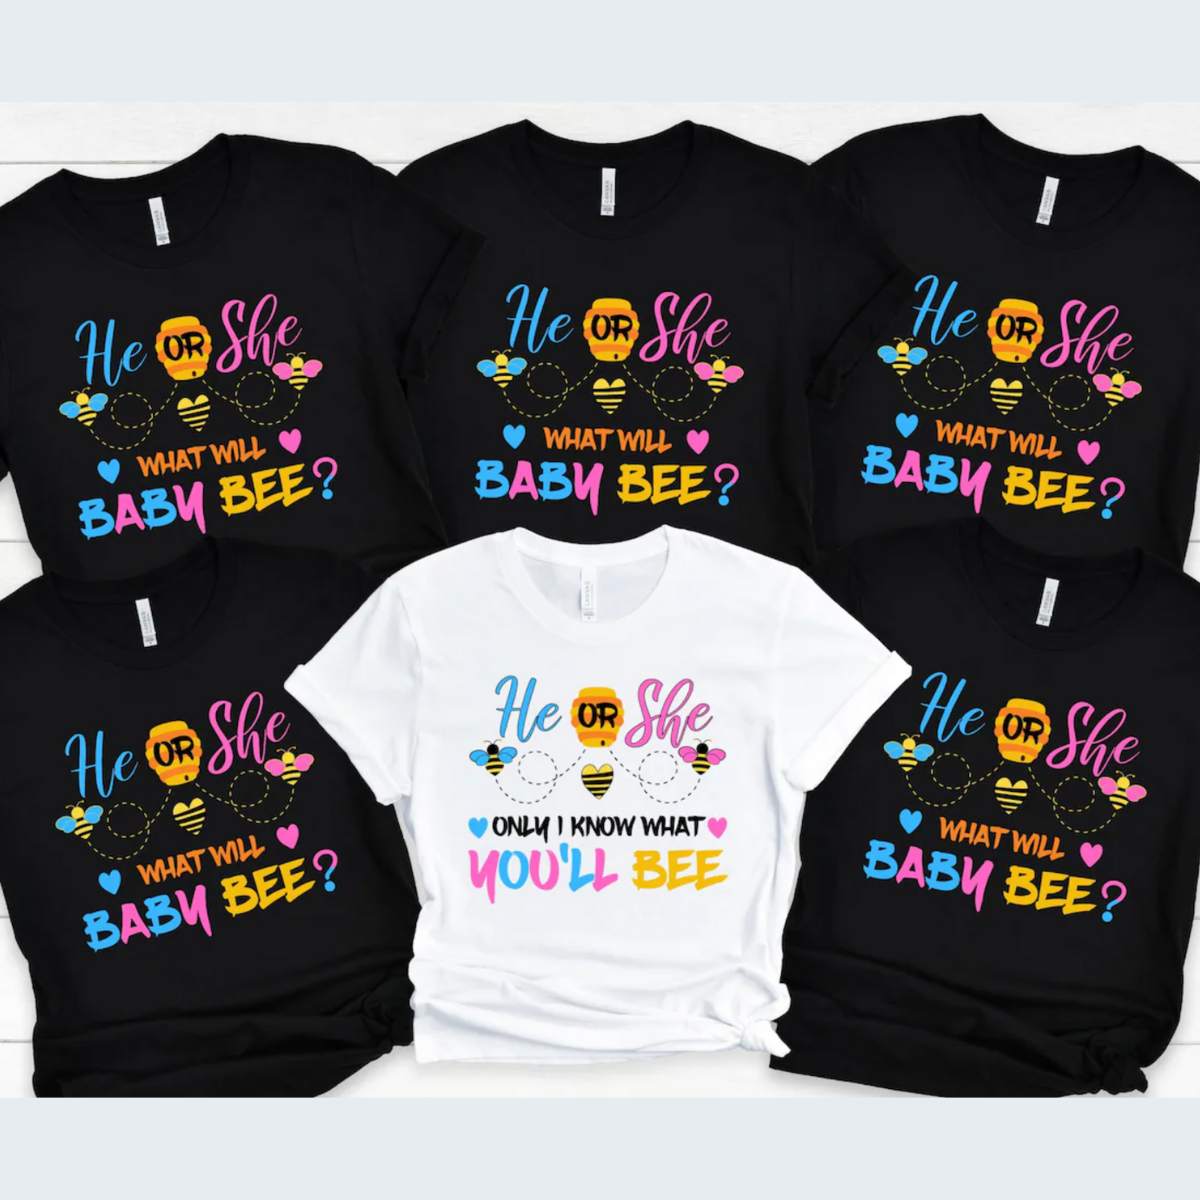 He Or She What Will Baby Bee Shirt, Bumble Bee Gender Reveal Party Shirts, Pregnancy Reveal Shirt, Keeper of the Gender, Mom to be Shirt